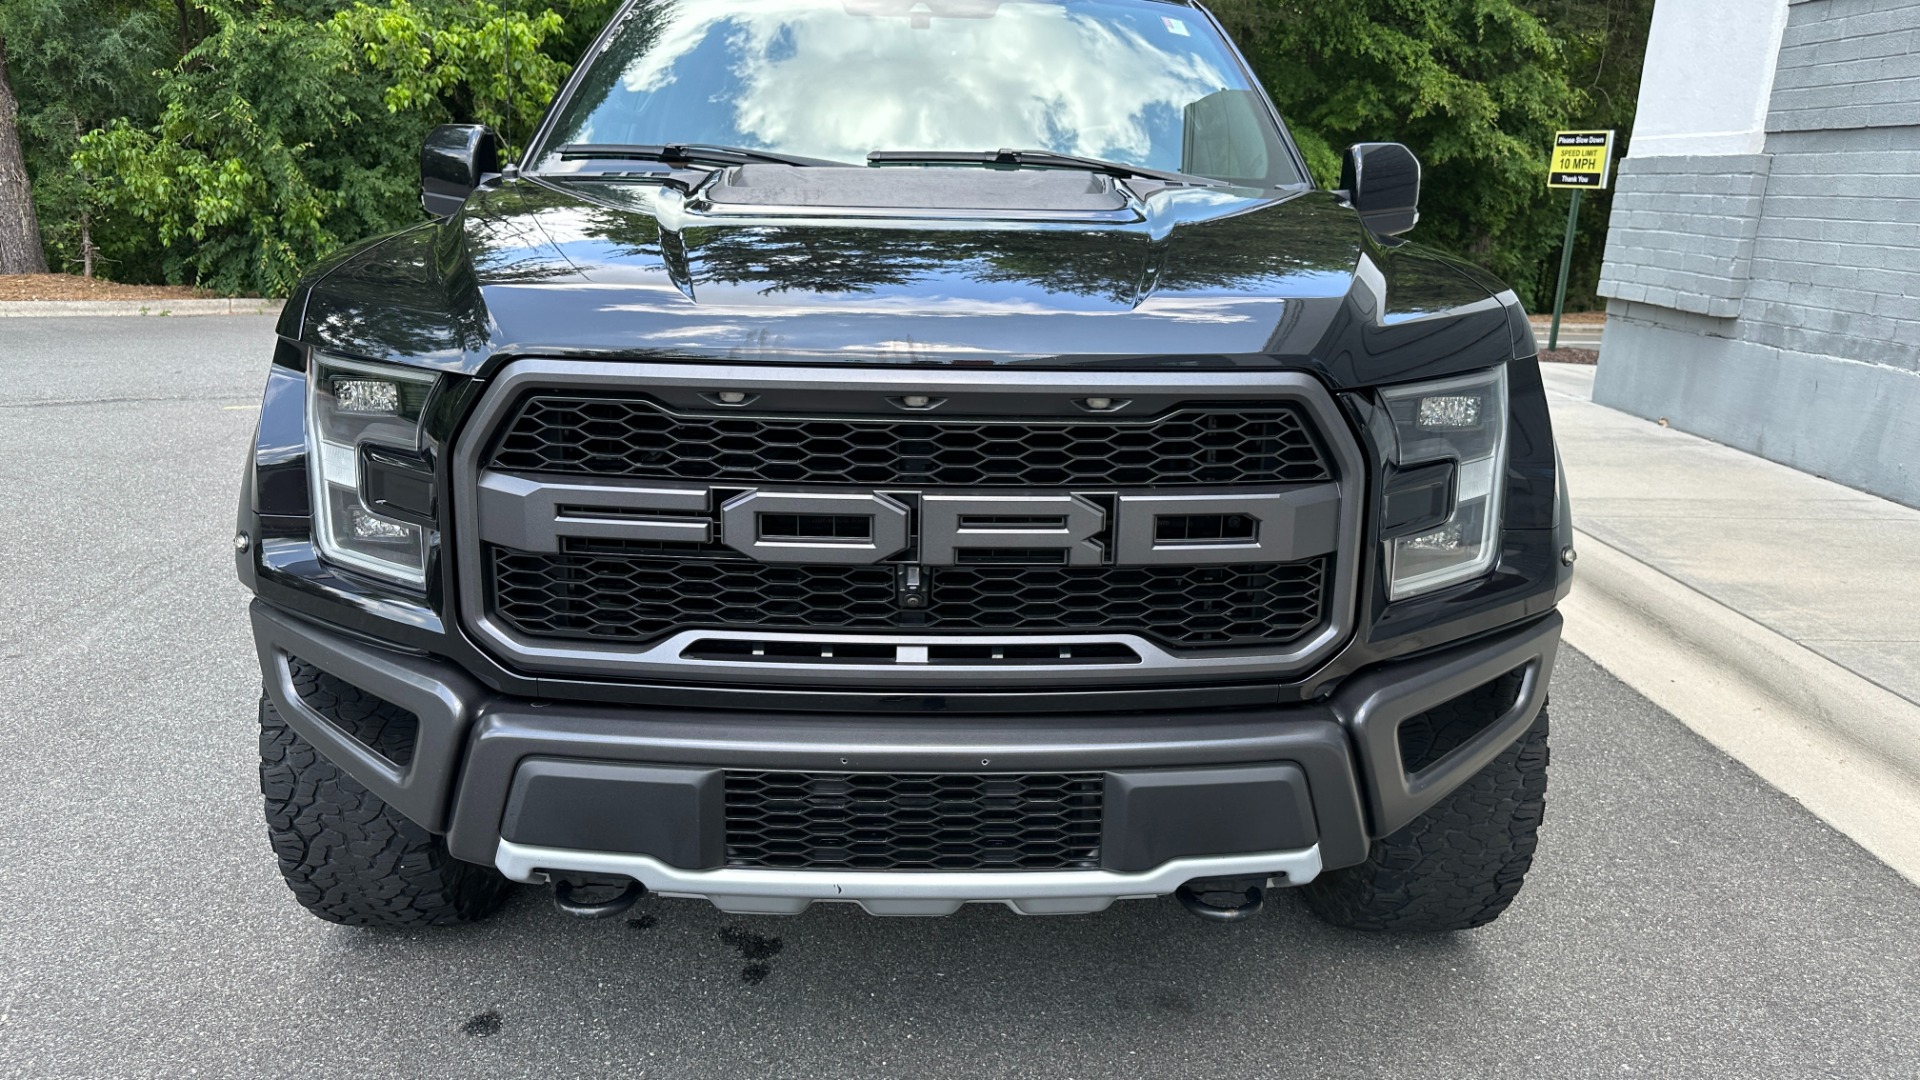 Used 2019 Ford F-150 RAPTOR / ECOBOOST / TECH PKG / PANORAMIC ROOF / BLOCK HEATER for sale $51,995 at Formula Imports in Charlotte NC 28227 8